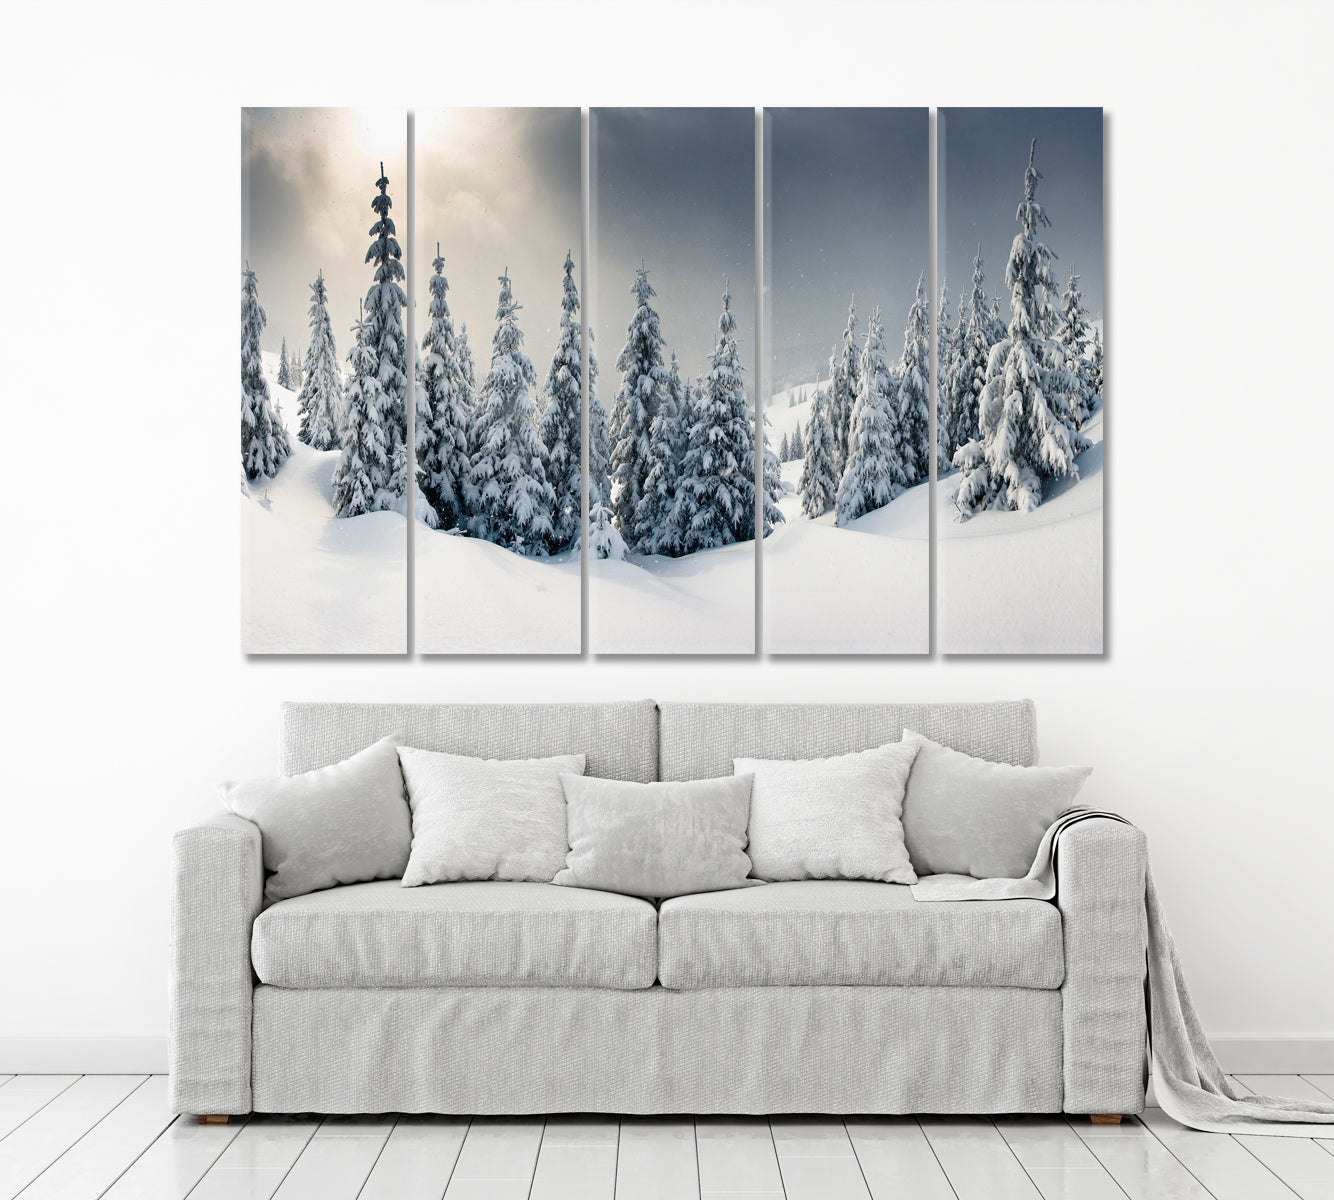 Trees with Frost And Snow In Mountains Winter Landscape Scenery Landscape Fine Art Print Artesty 5 panels 36" x 24" 